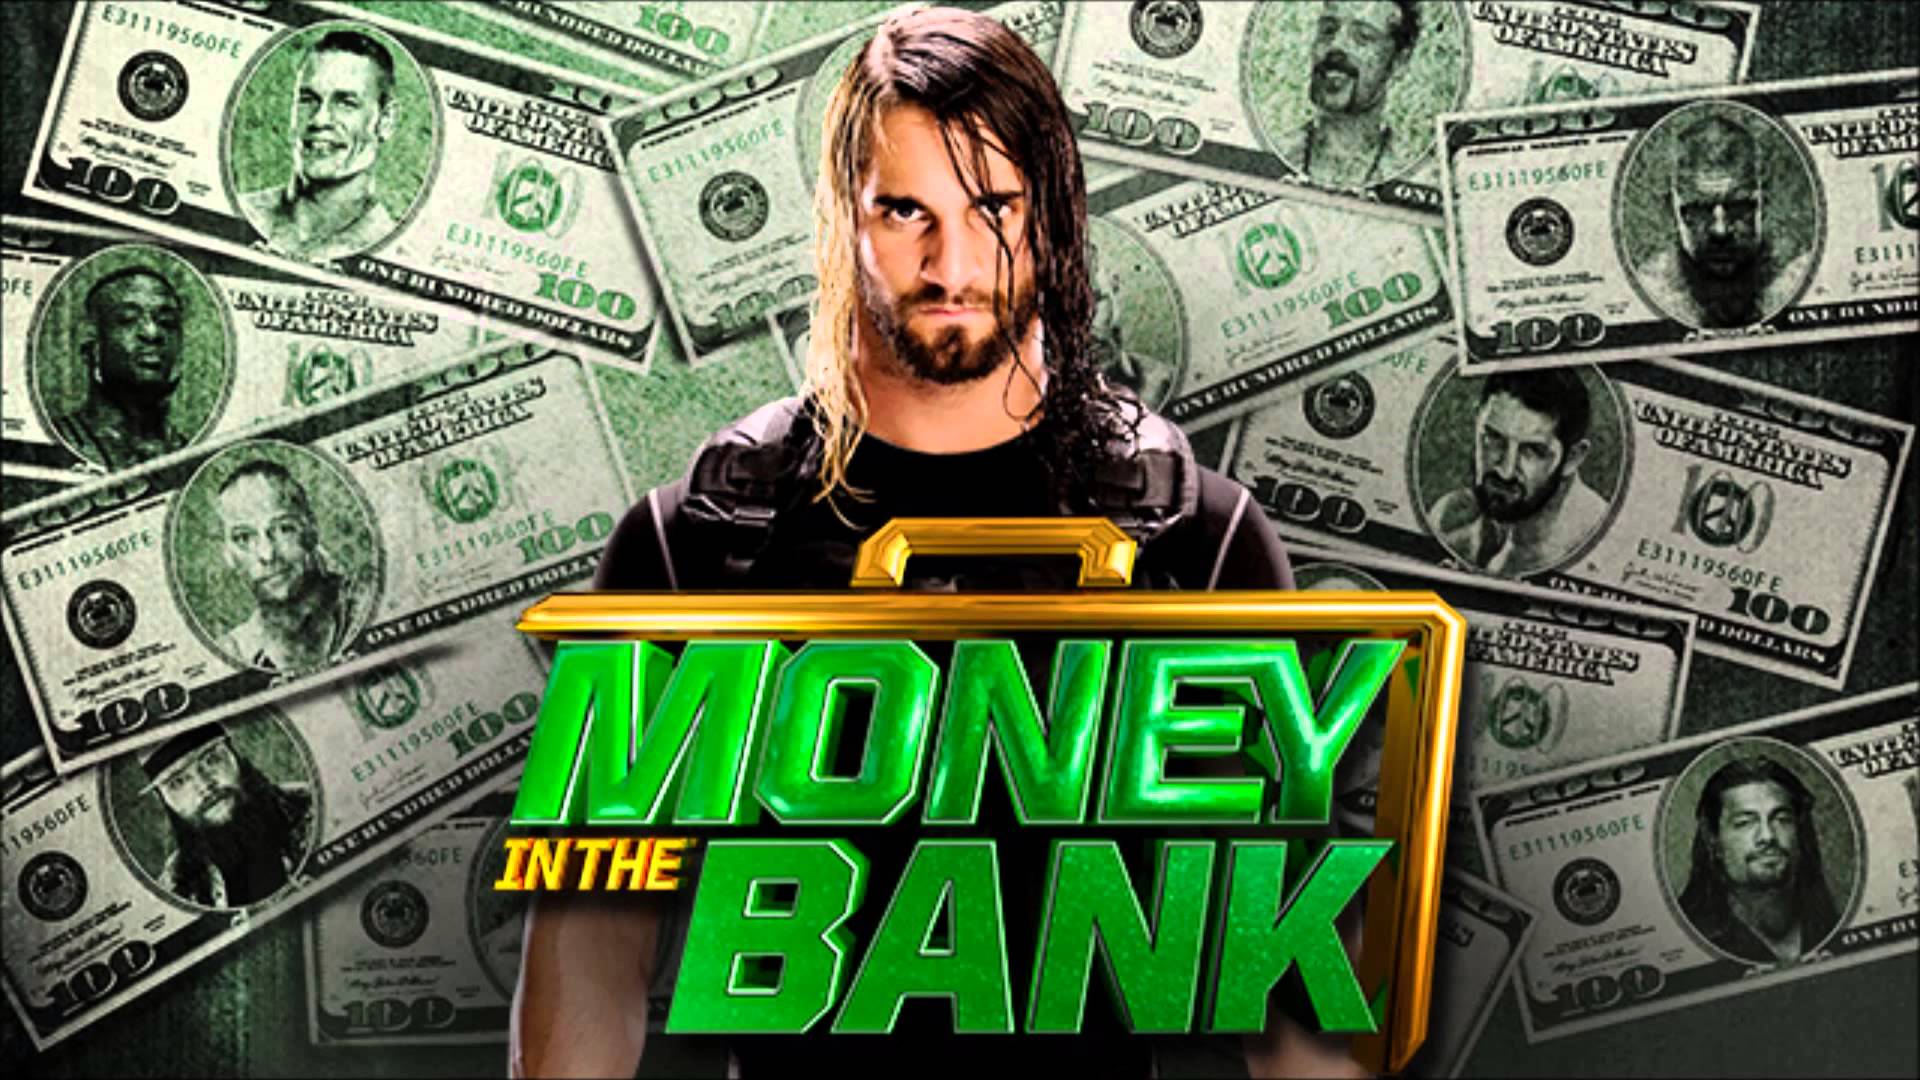 WWE Money In The Bank Wallpapers Wallpaper Cave